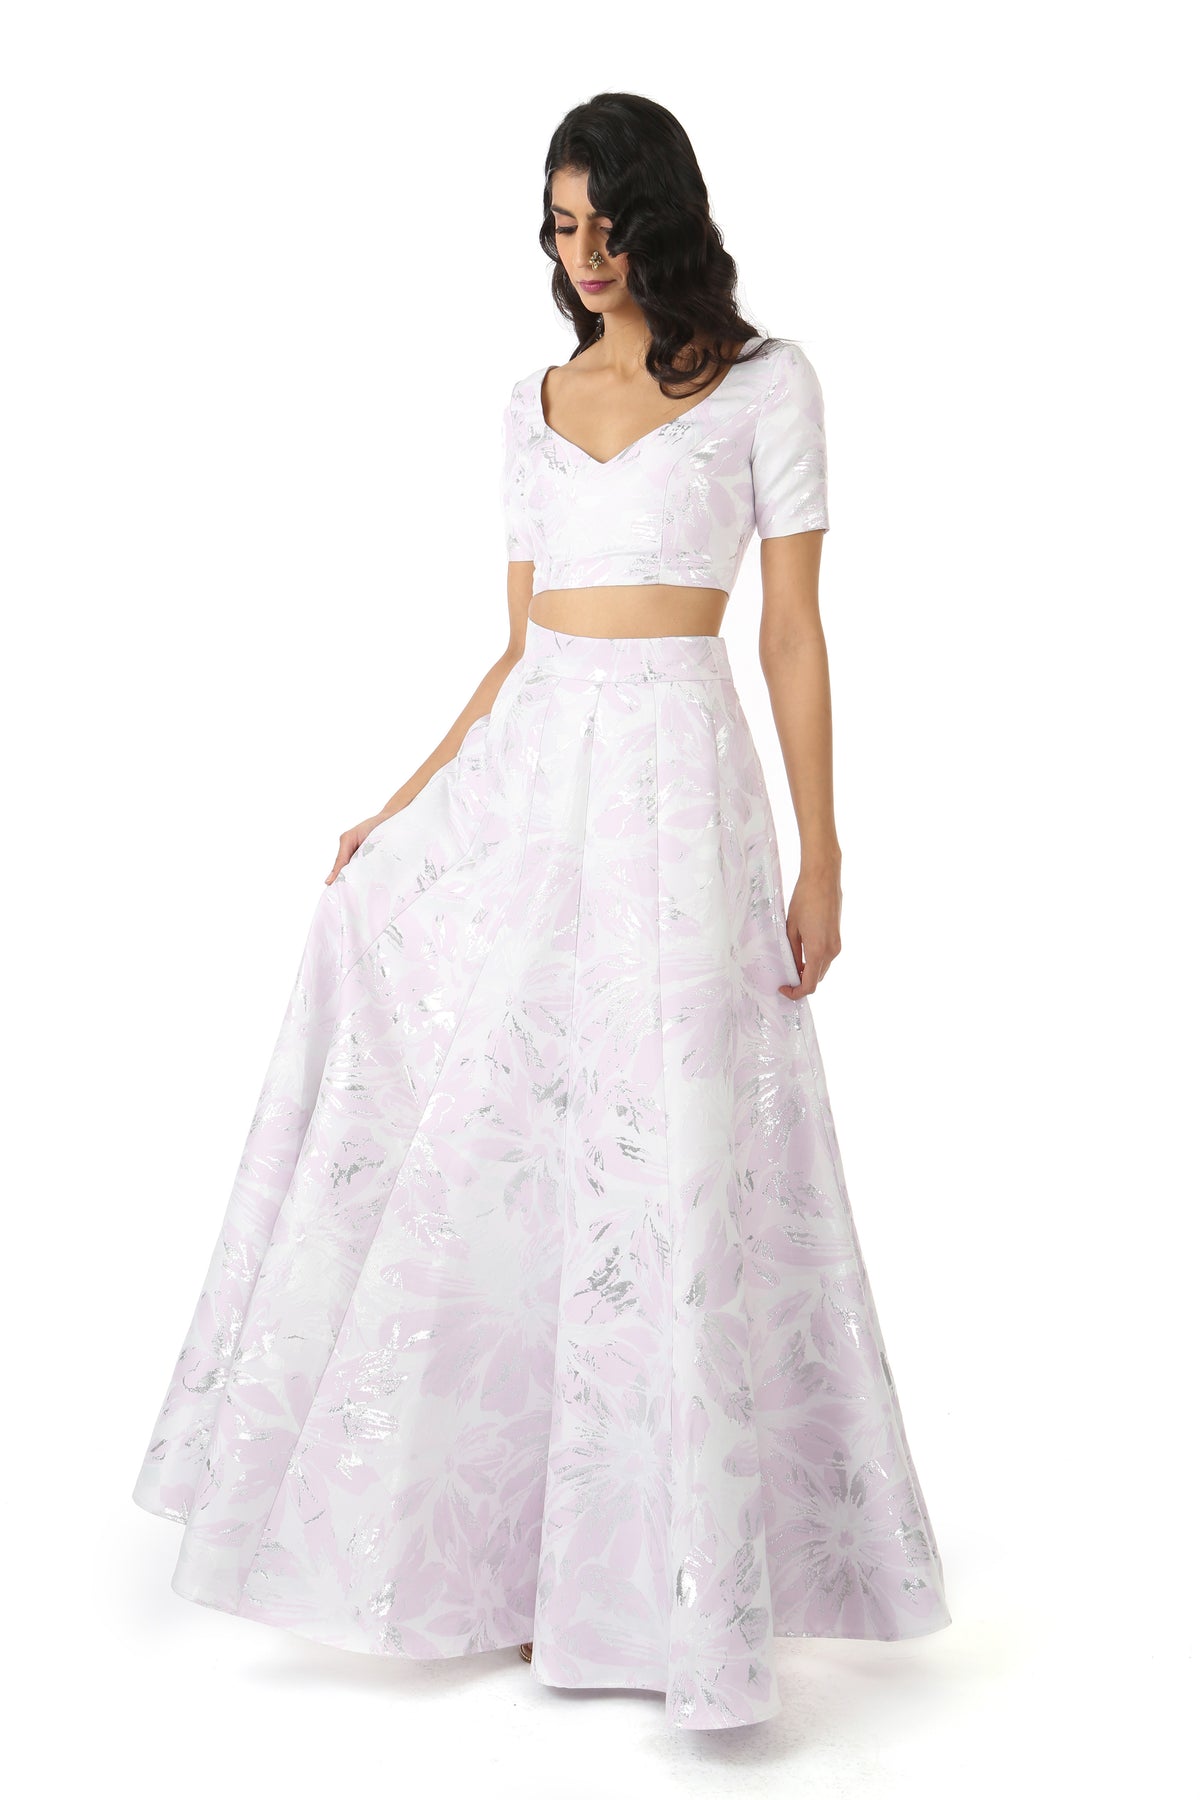 Harleen Kaur SANYA Short Sleeve Crop Top in Metallic Silver, White, and Lavender Jacquard with Sweetheart Neckline - Front View